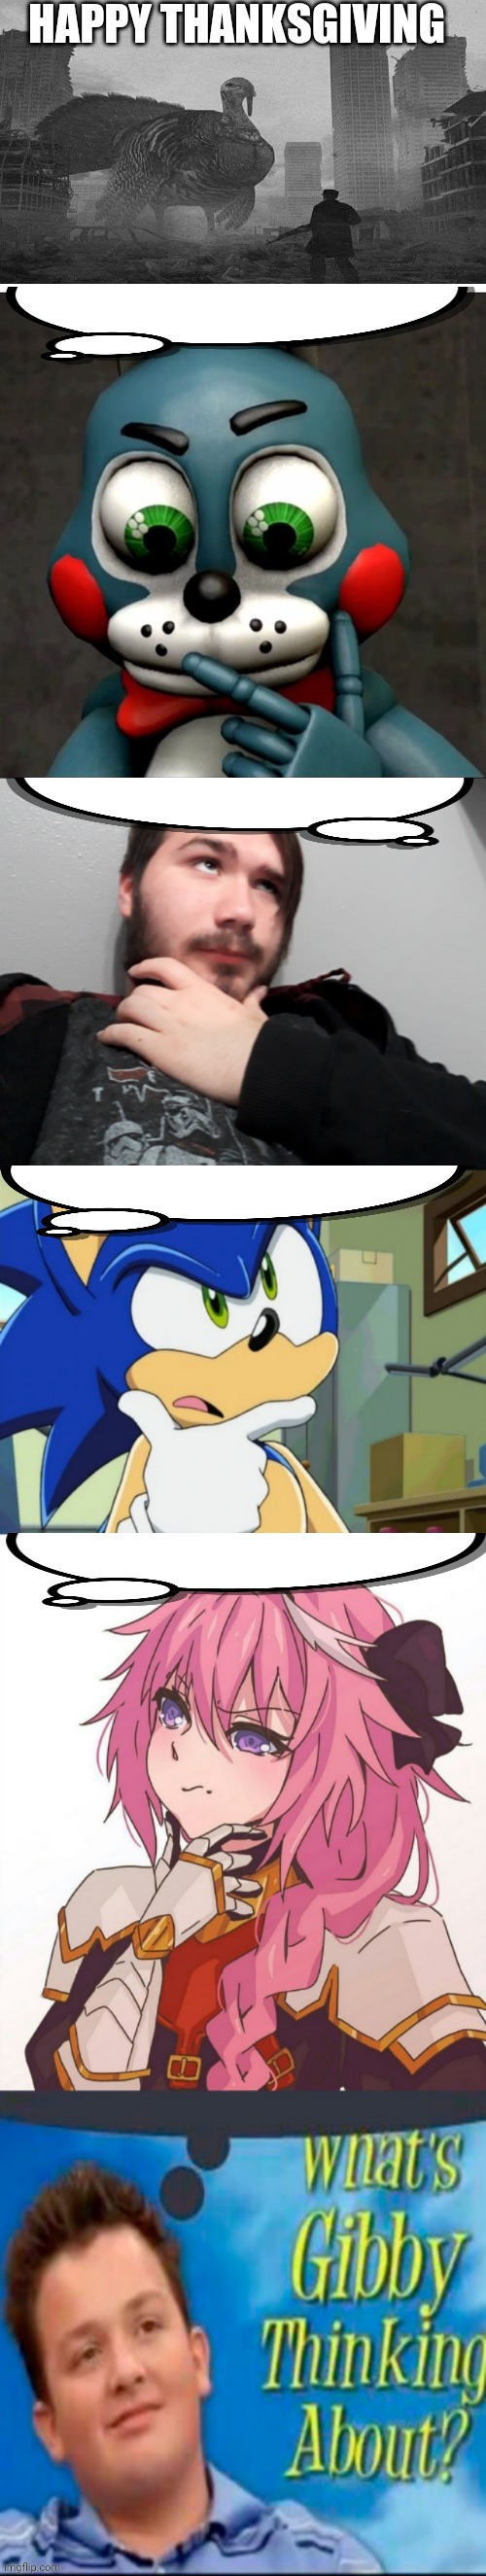 HAPPY THANKSGIVING | image tagged in memes,sonic the hedgehog,anime,fur,fnaf,thanksgiving | made w/ Imgflip meme maker